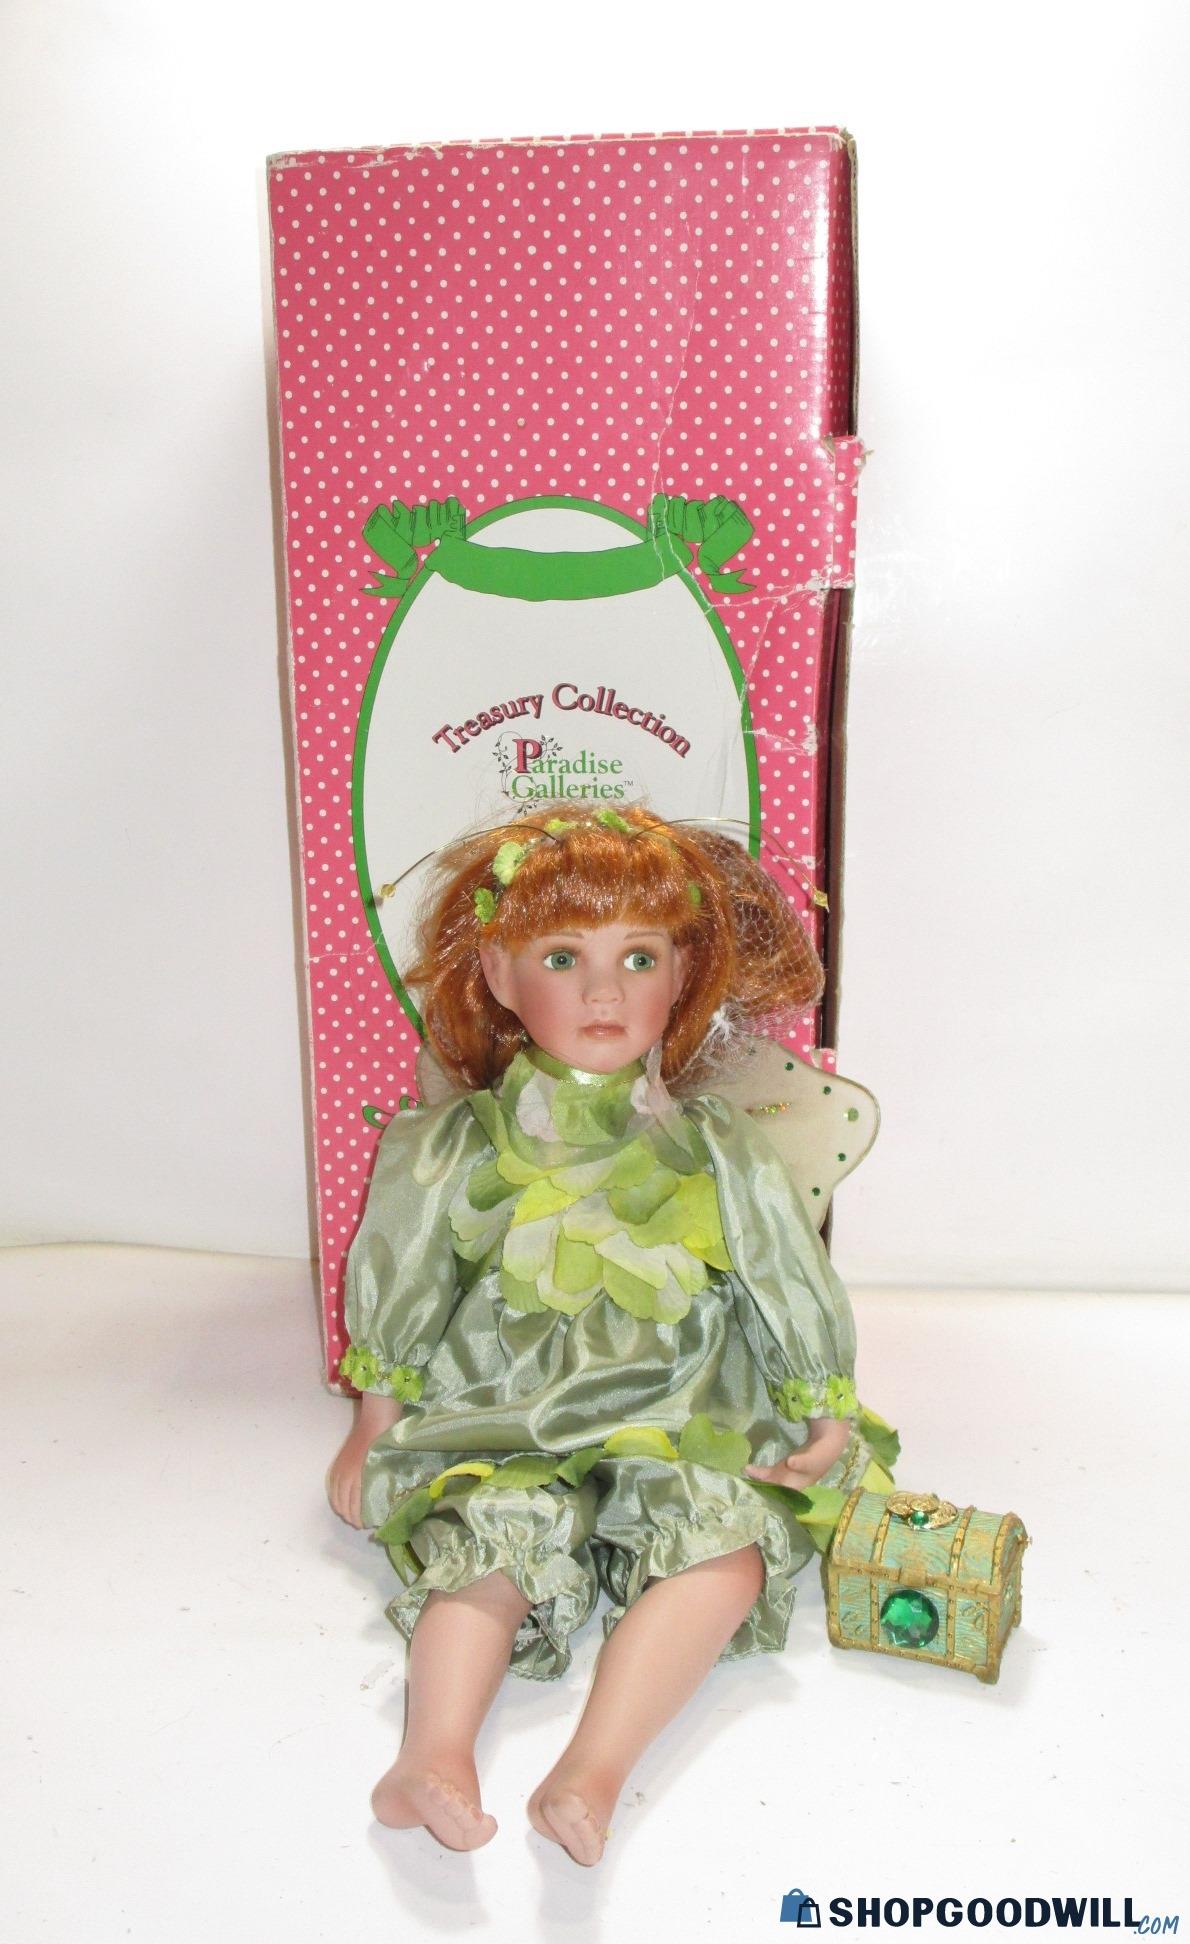 Paradise Galleries Treasury Collection Porcelain Fairy Doll